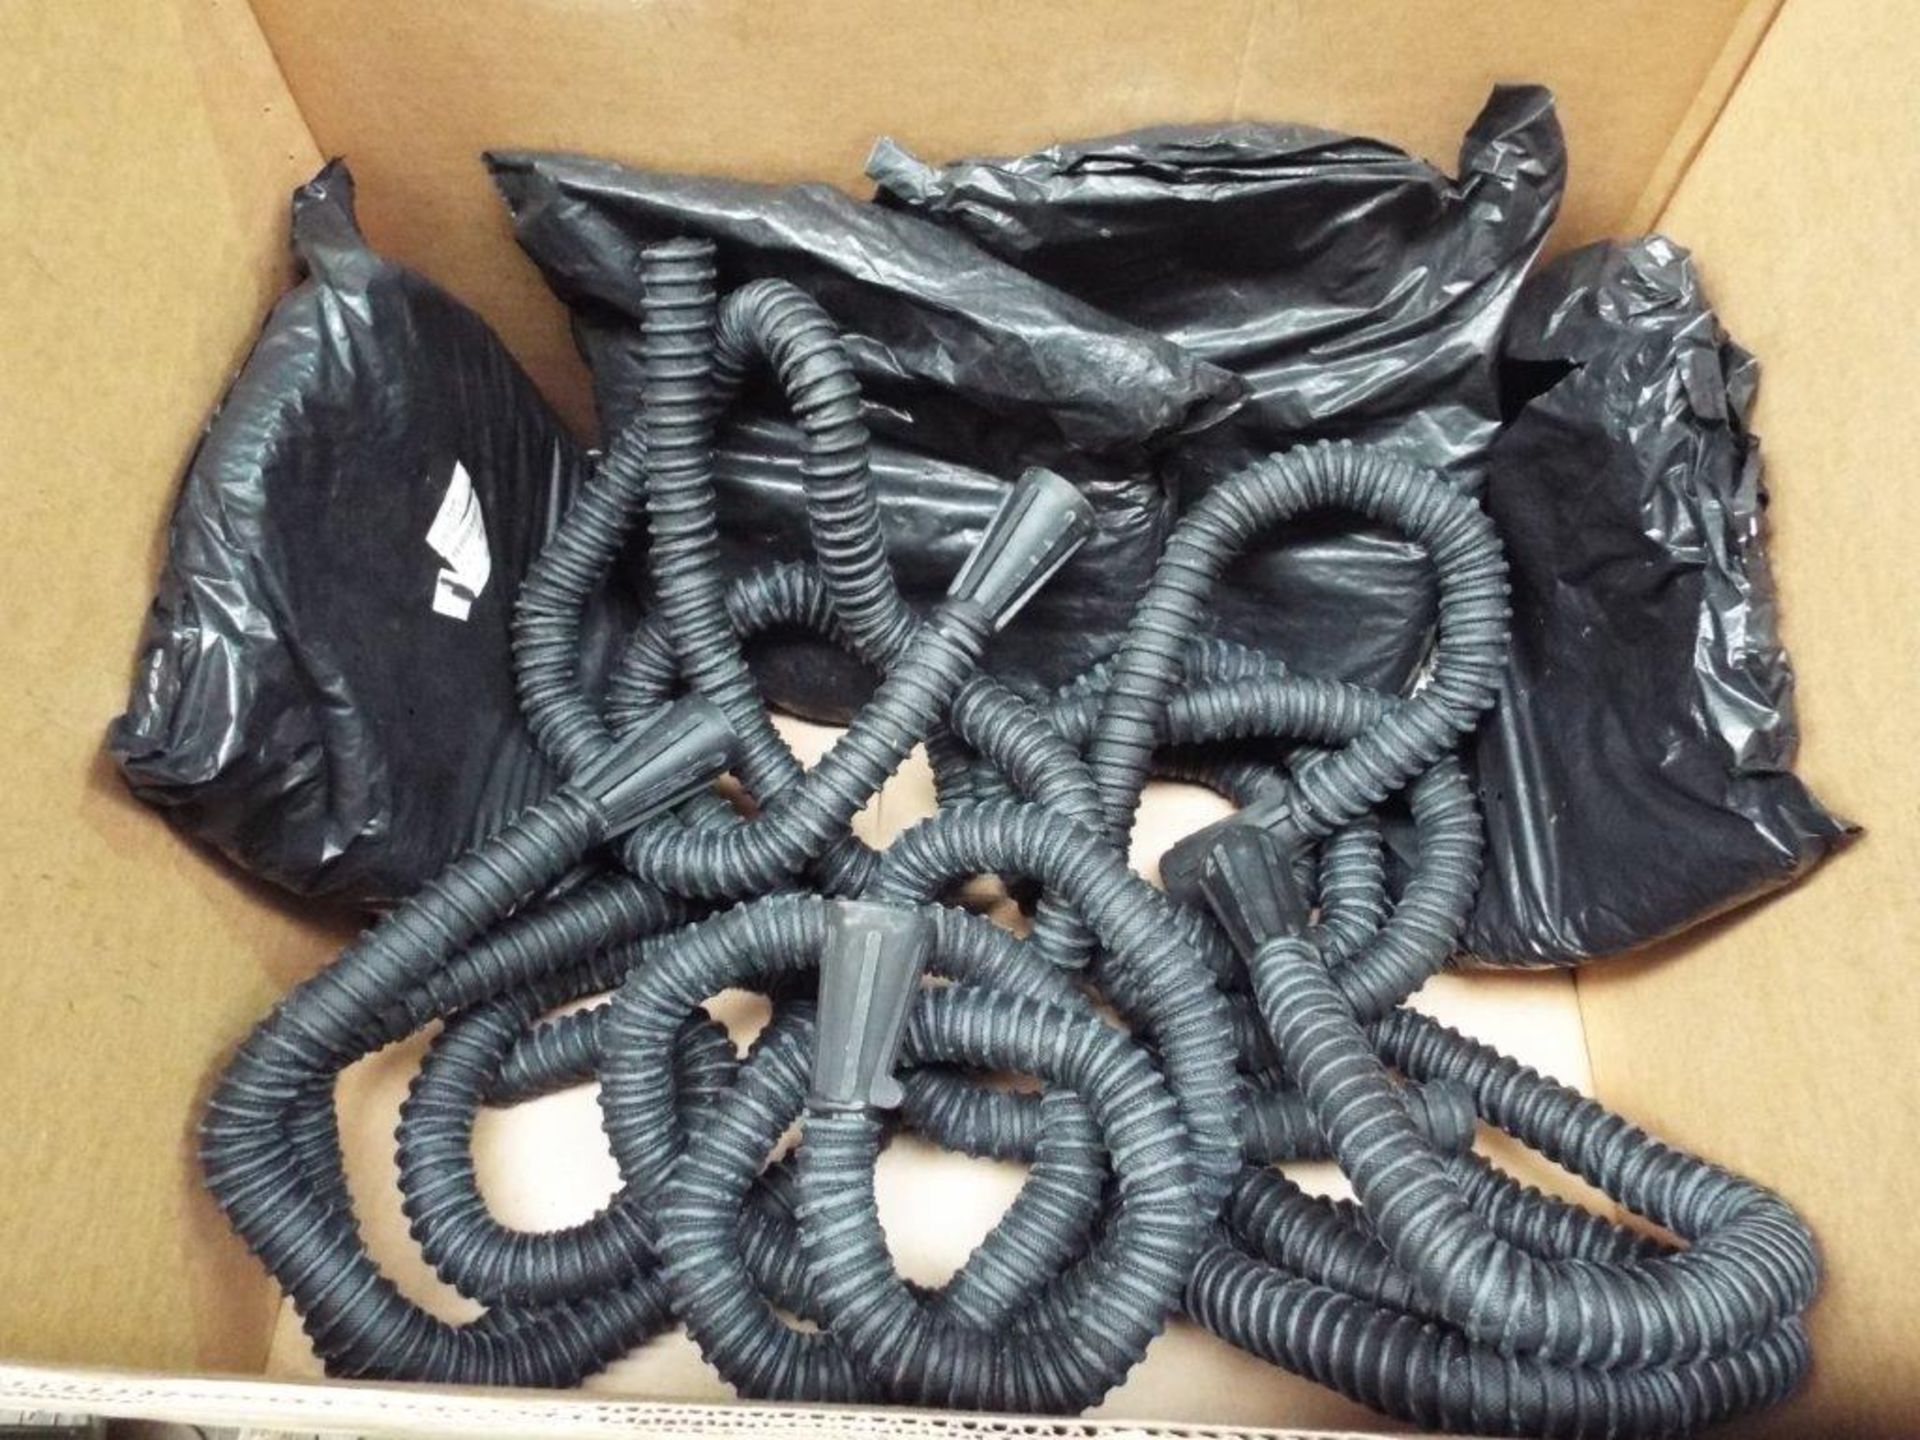 9 x Exhaust Disposal Hoses